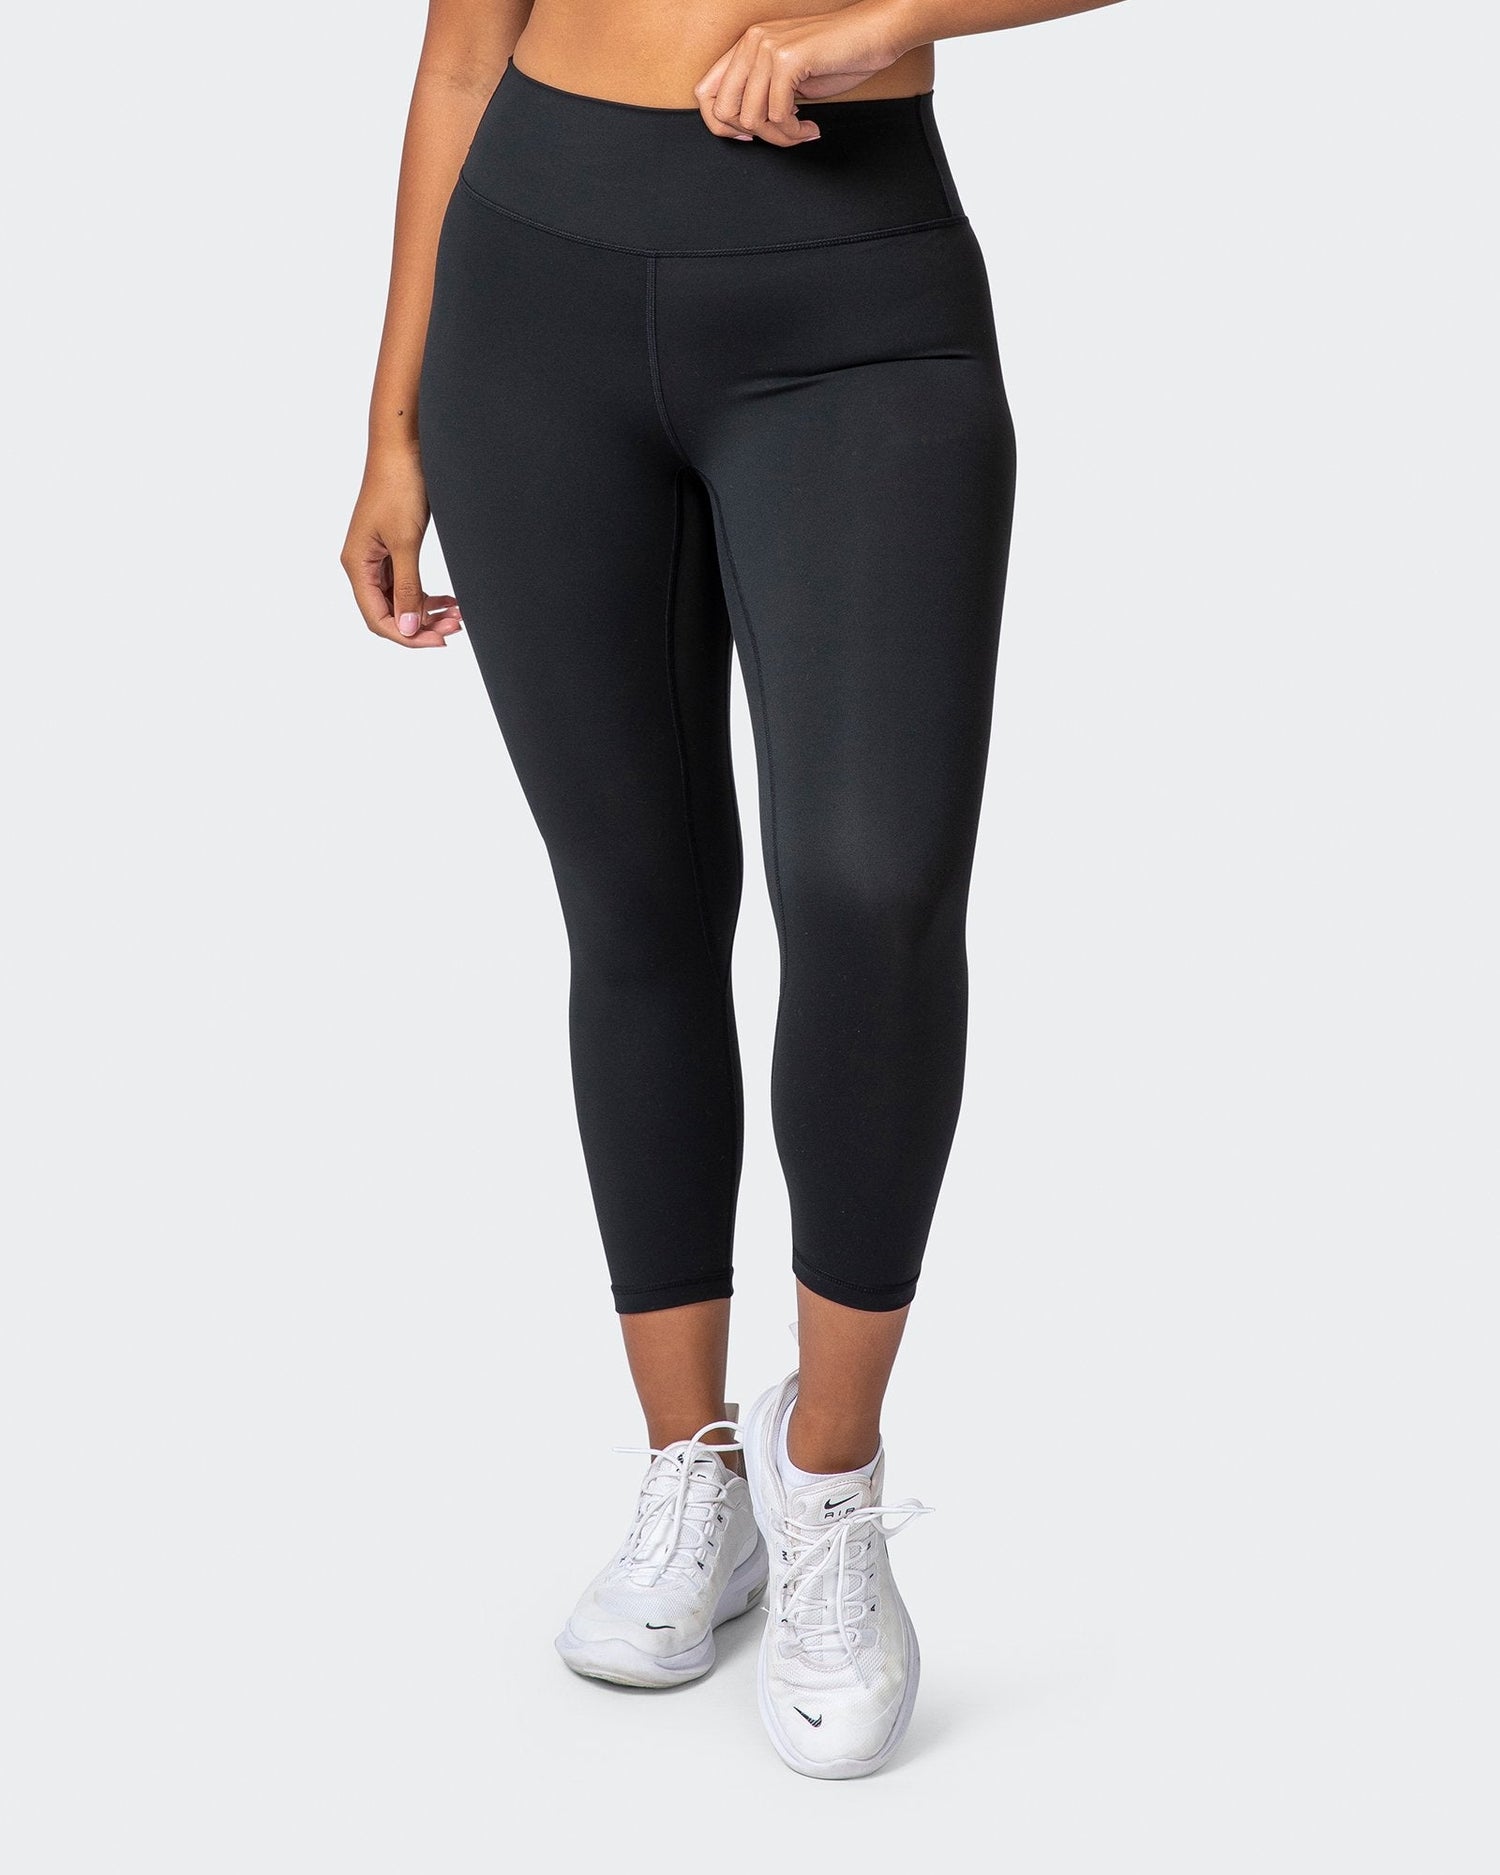 The Lux Butter Leggings